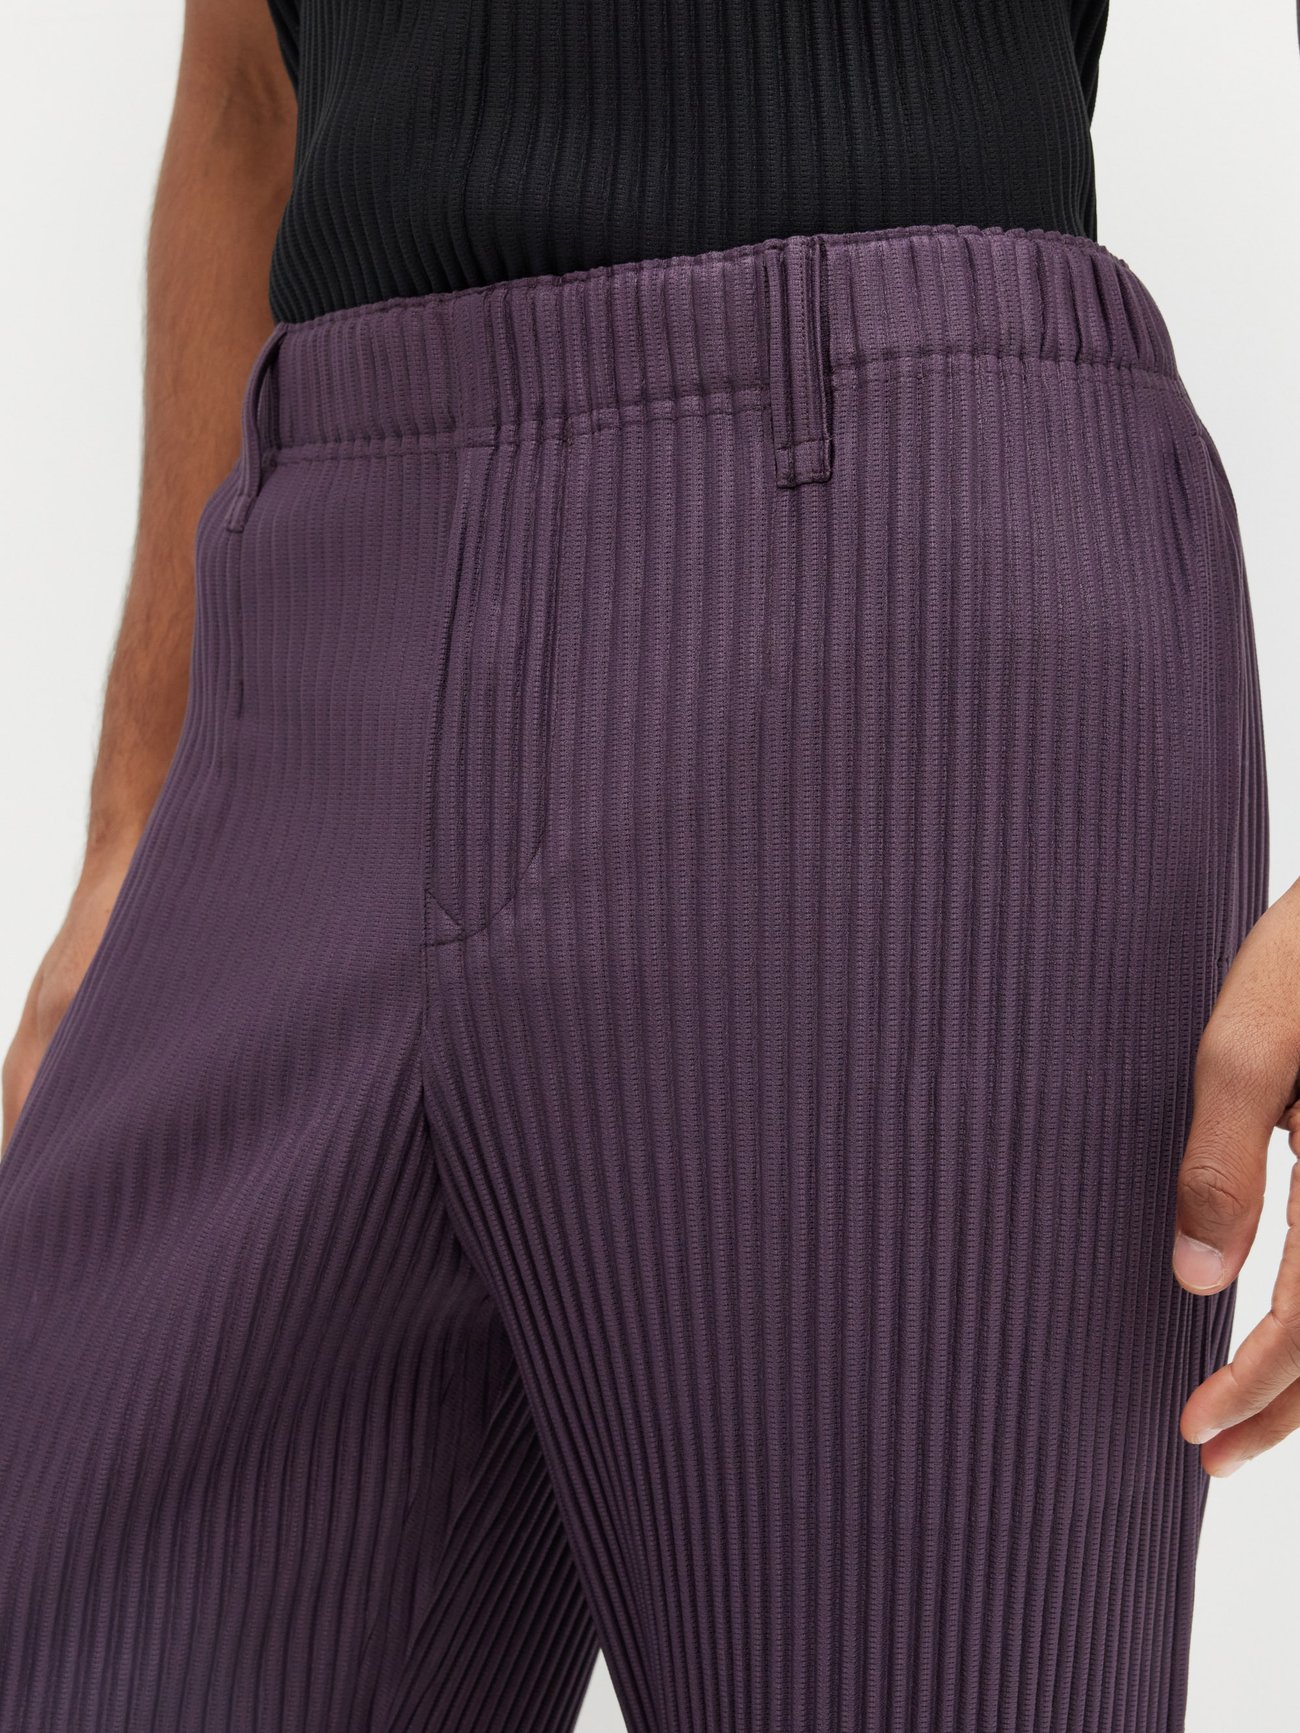 Pants | The official ISSEY MIYAKE ONLINE STORE | ISSEY MIYAKE USA